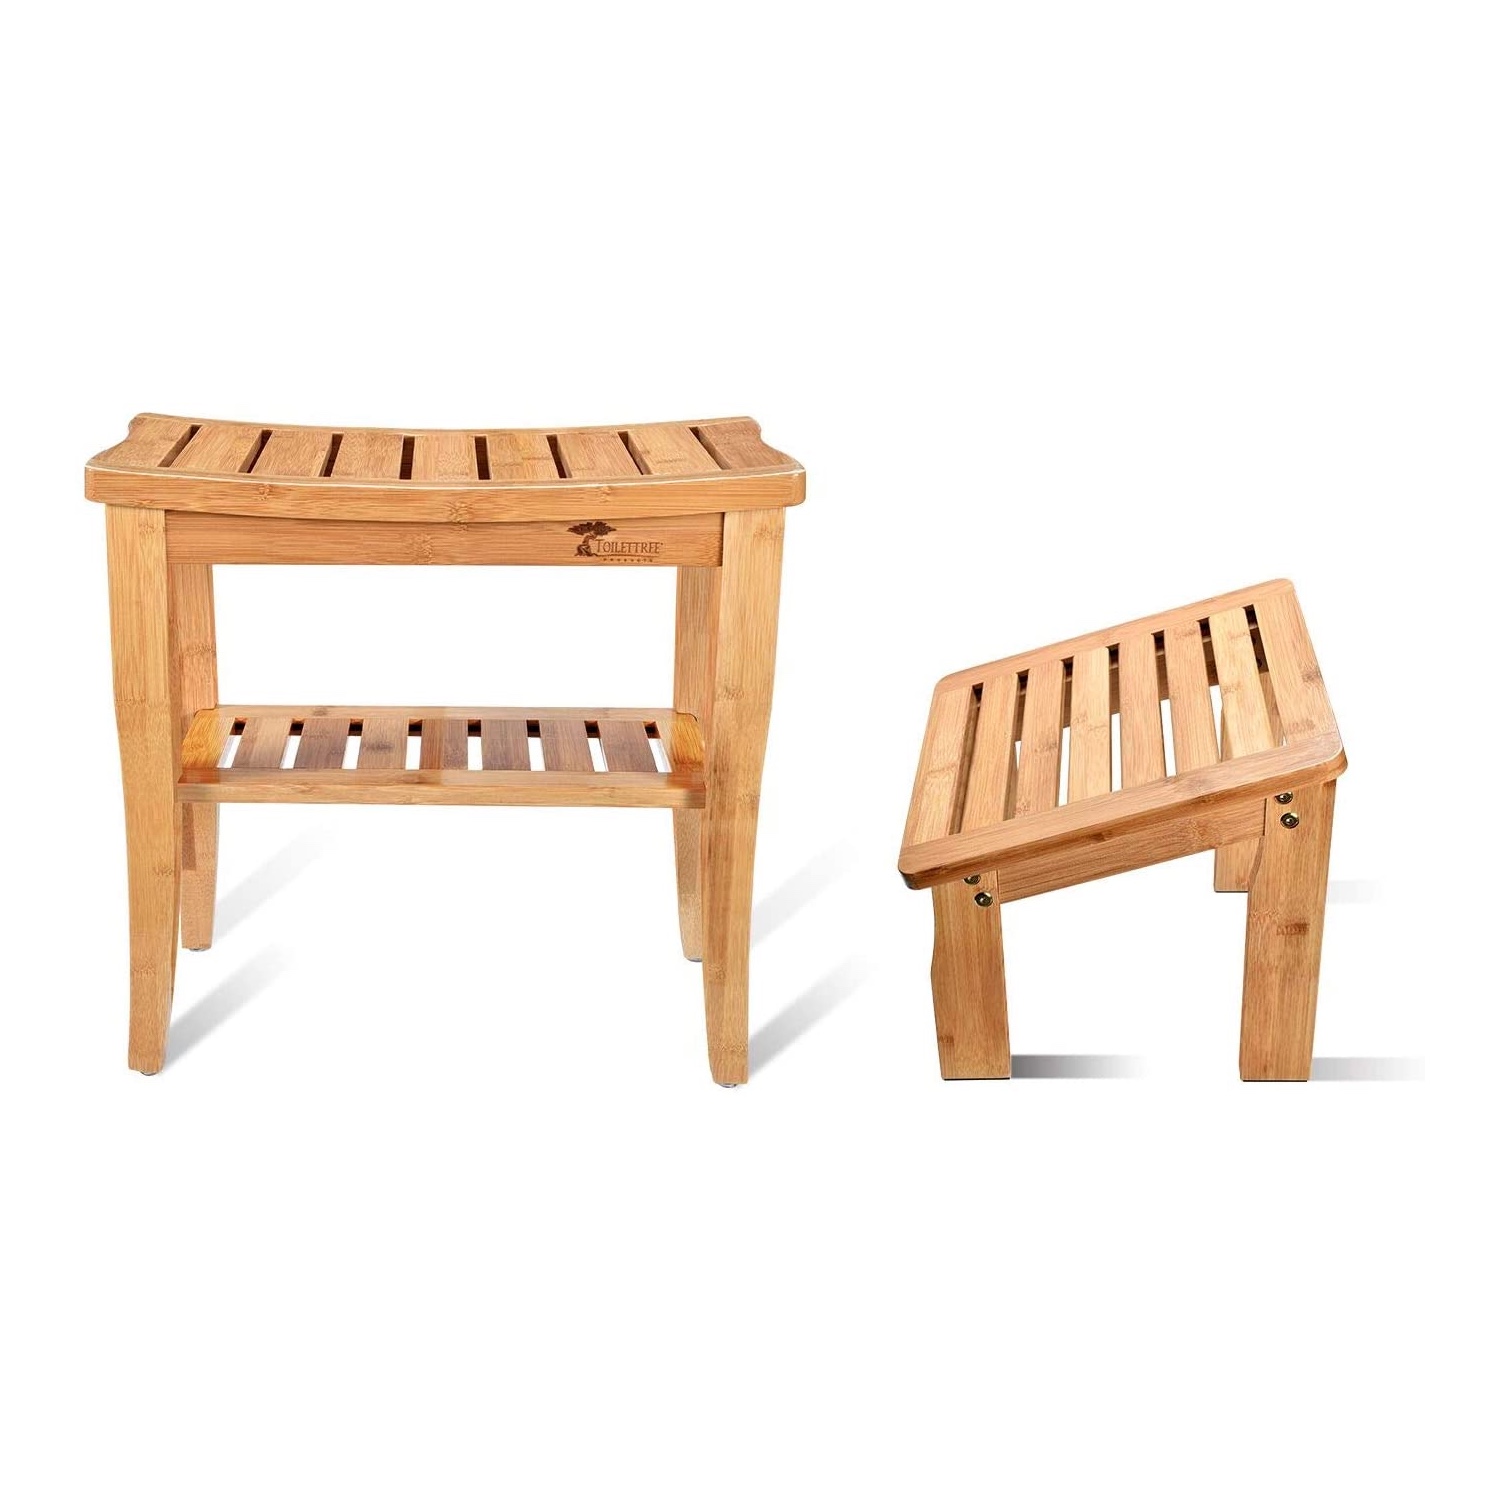 ToiletTree Products Deluxe Wooden Bamboo Shower Bench